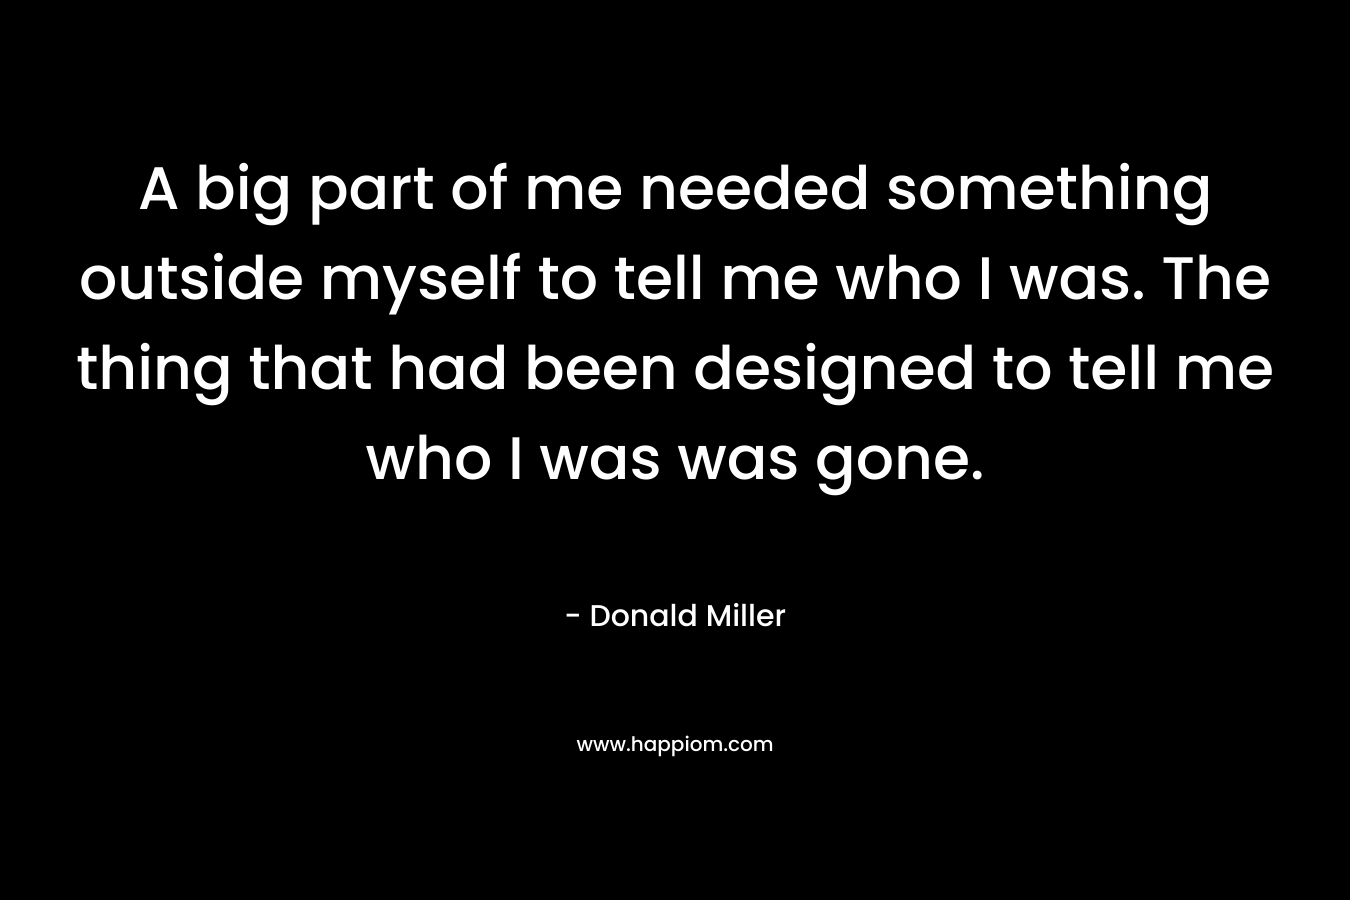 A big part of me needed something outside myself to tell me who I was. The thing that had been designed to tell me who I was was gone. – Donald Miller